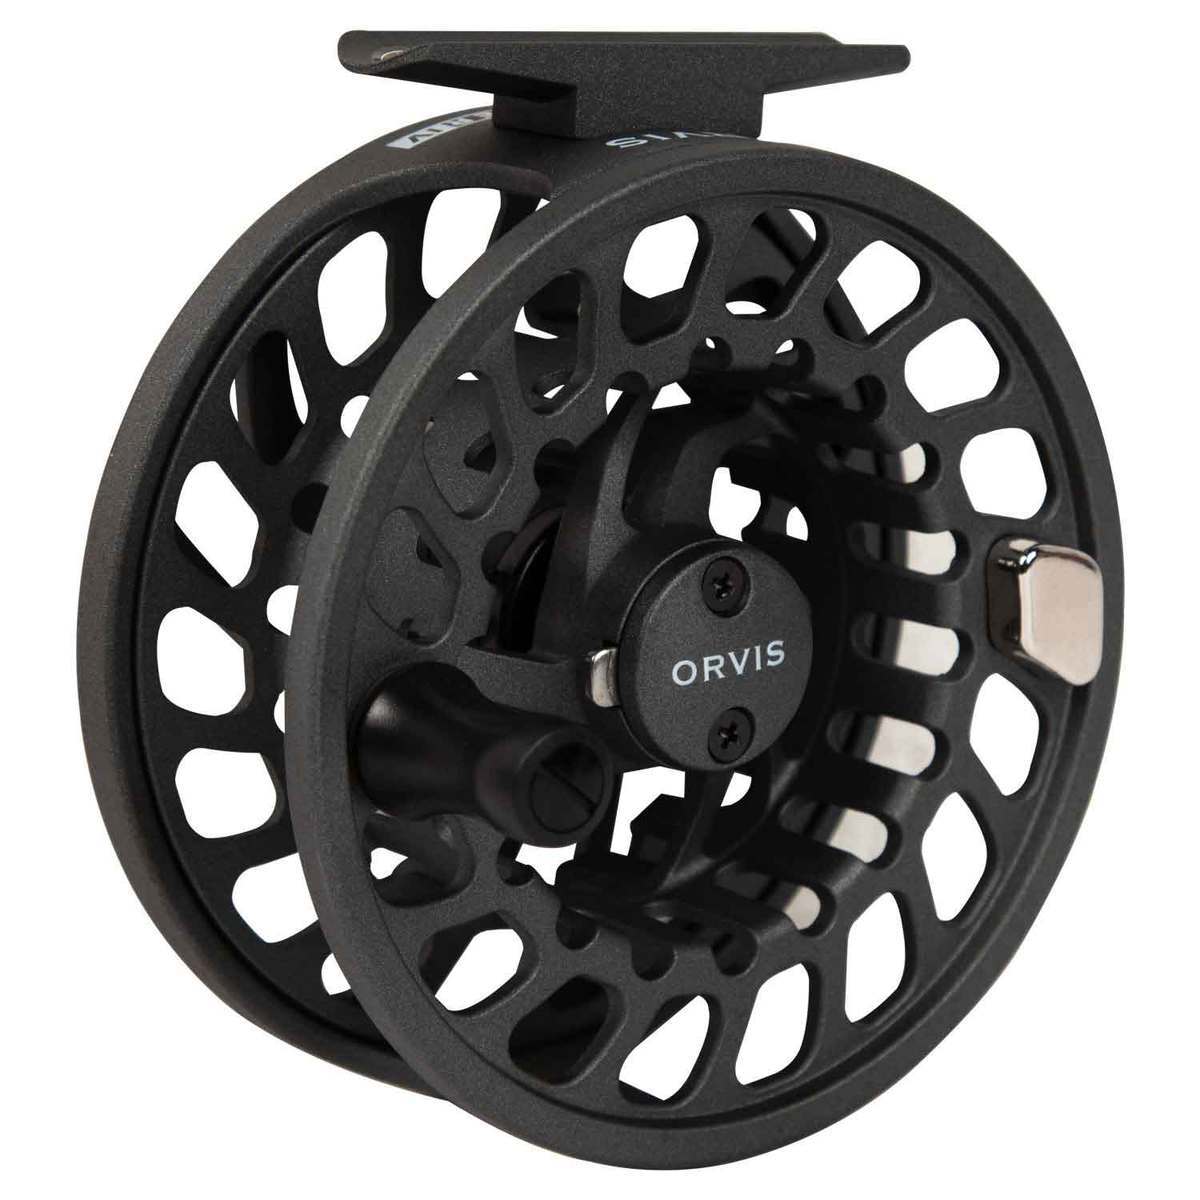 Orvis SSR Disc Spey Fly Reel - The Compleat Angler